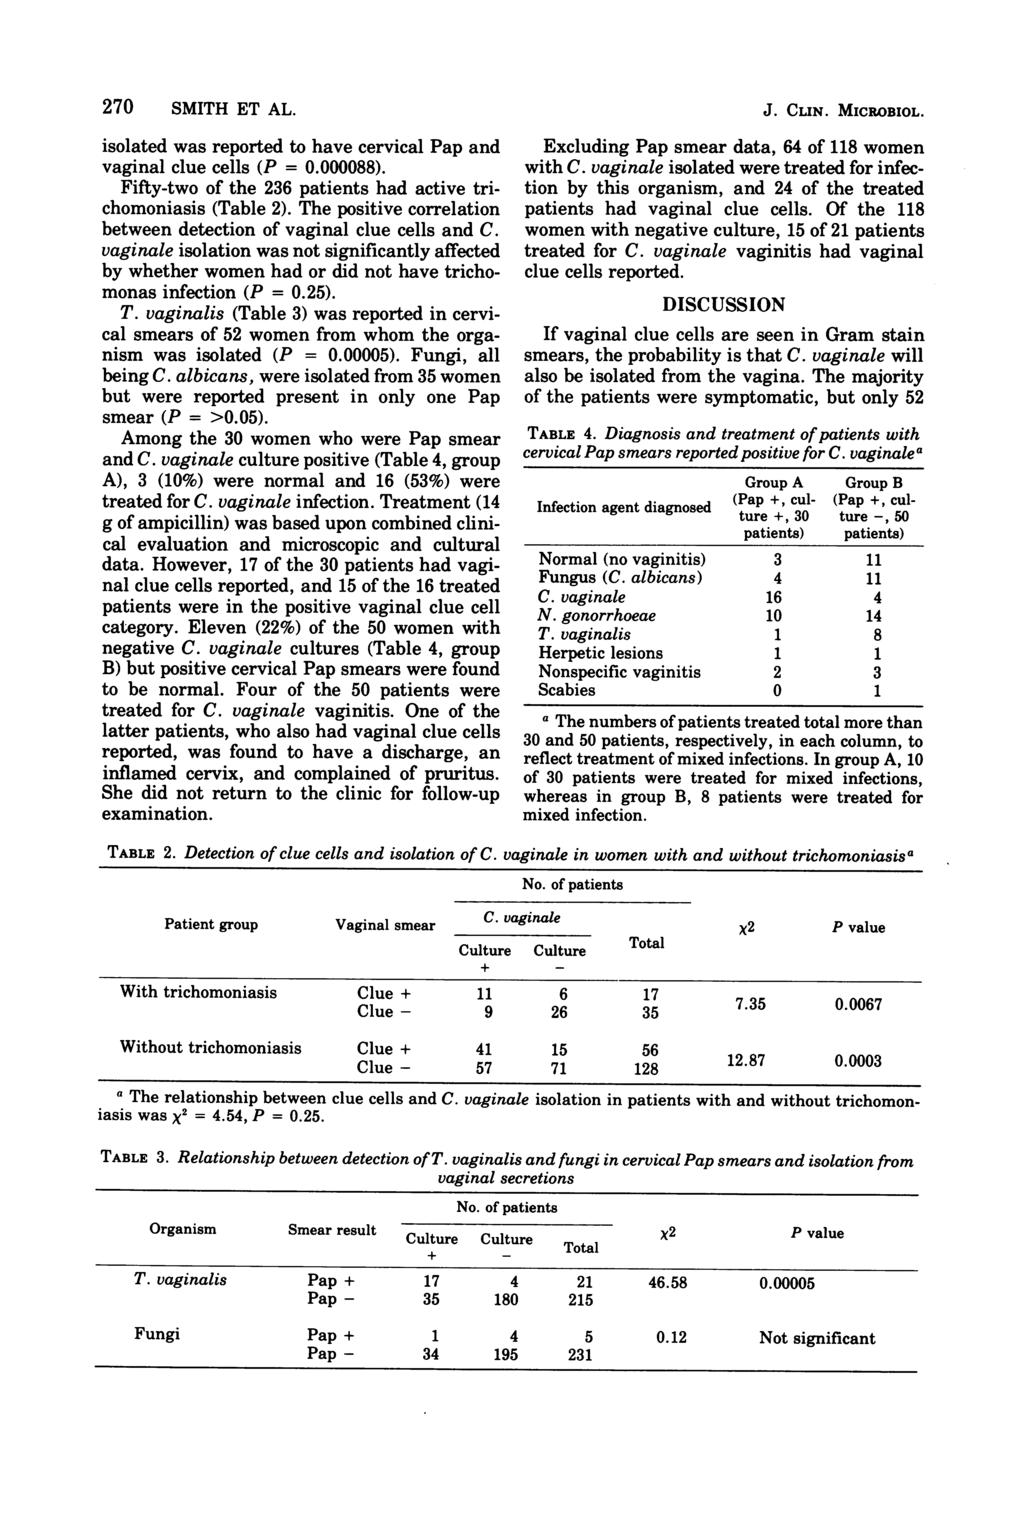 270 SMITH ET AL. isolated was reported to have cervical Pap and vaginal clue cells (P = 0.000088). Fifty-two of the 236 patients had active trichomoniasis (Table 2).